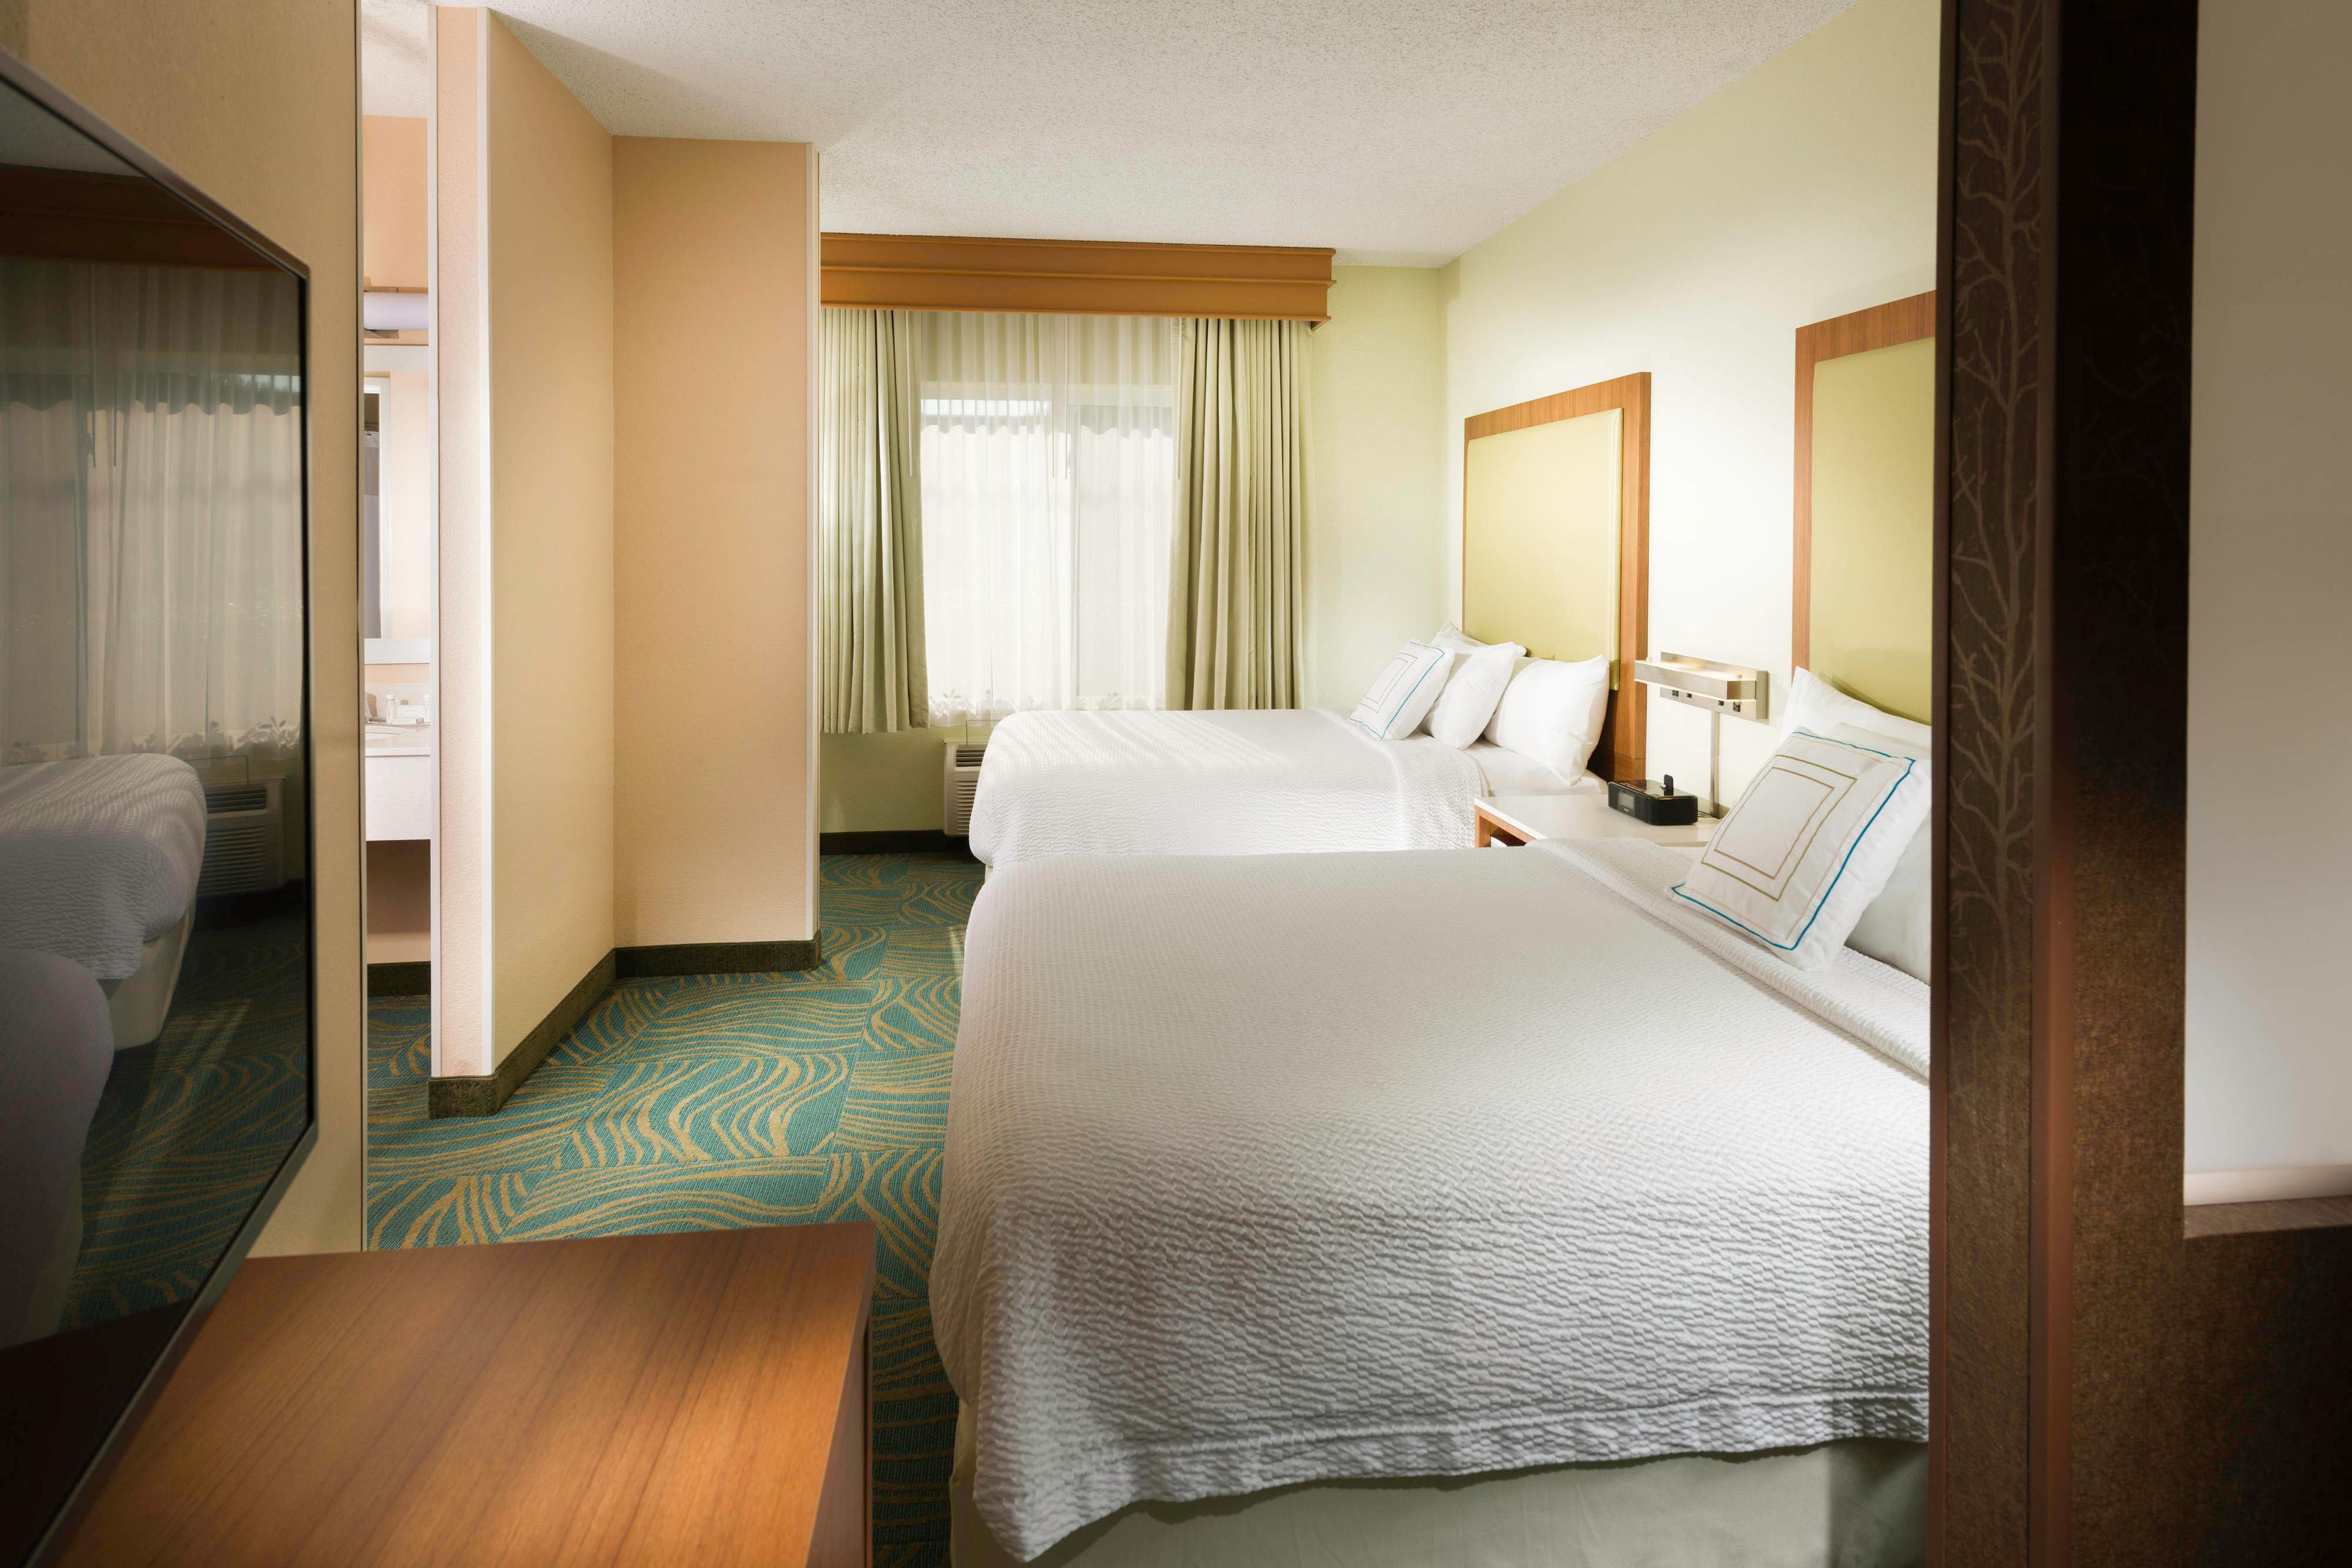 Our spacious Queen/Queen Suite is perfect for your family's comfort.